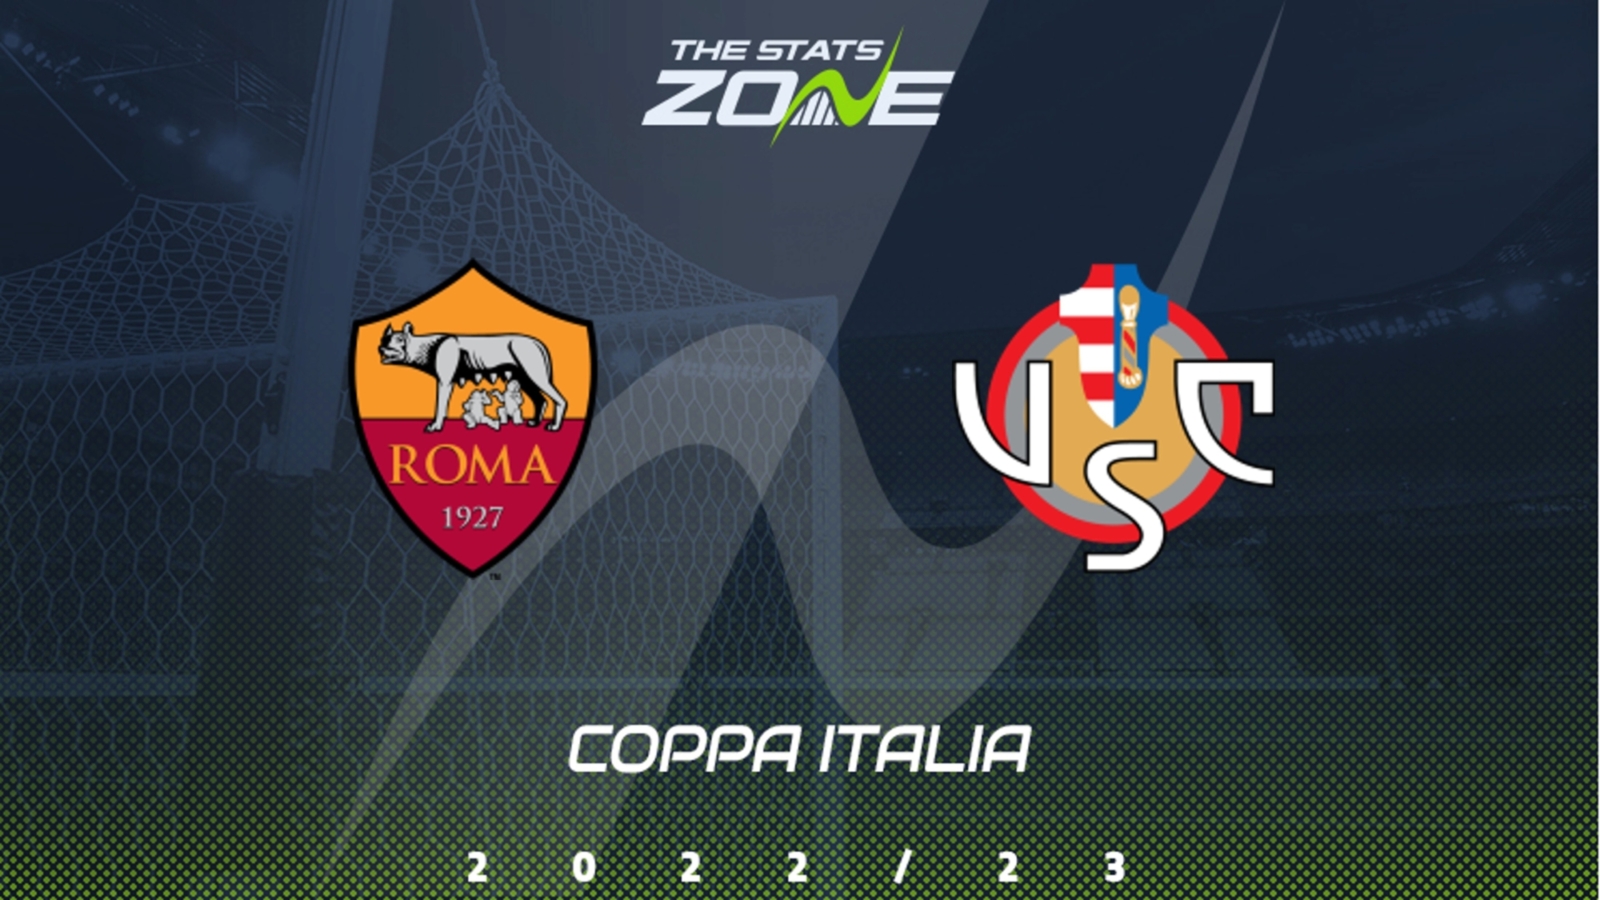 Roma v. Cremonese: Game is officially sold out! - AS Roma